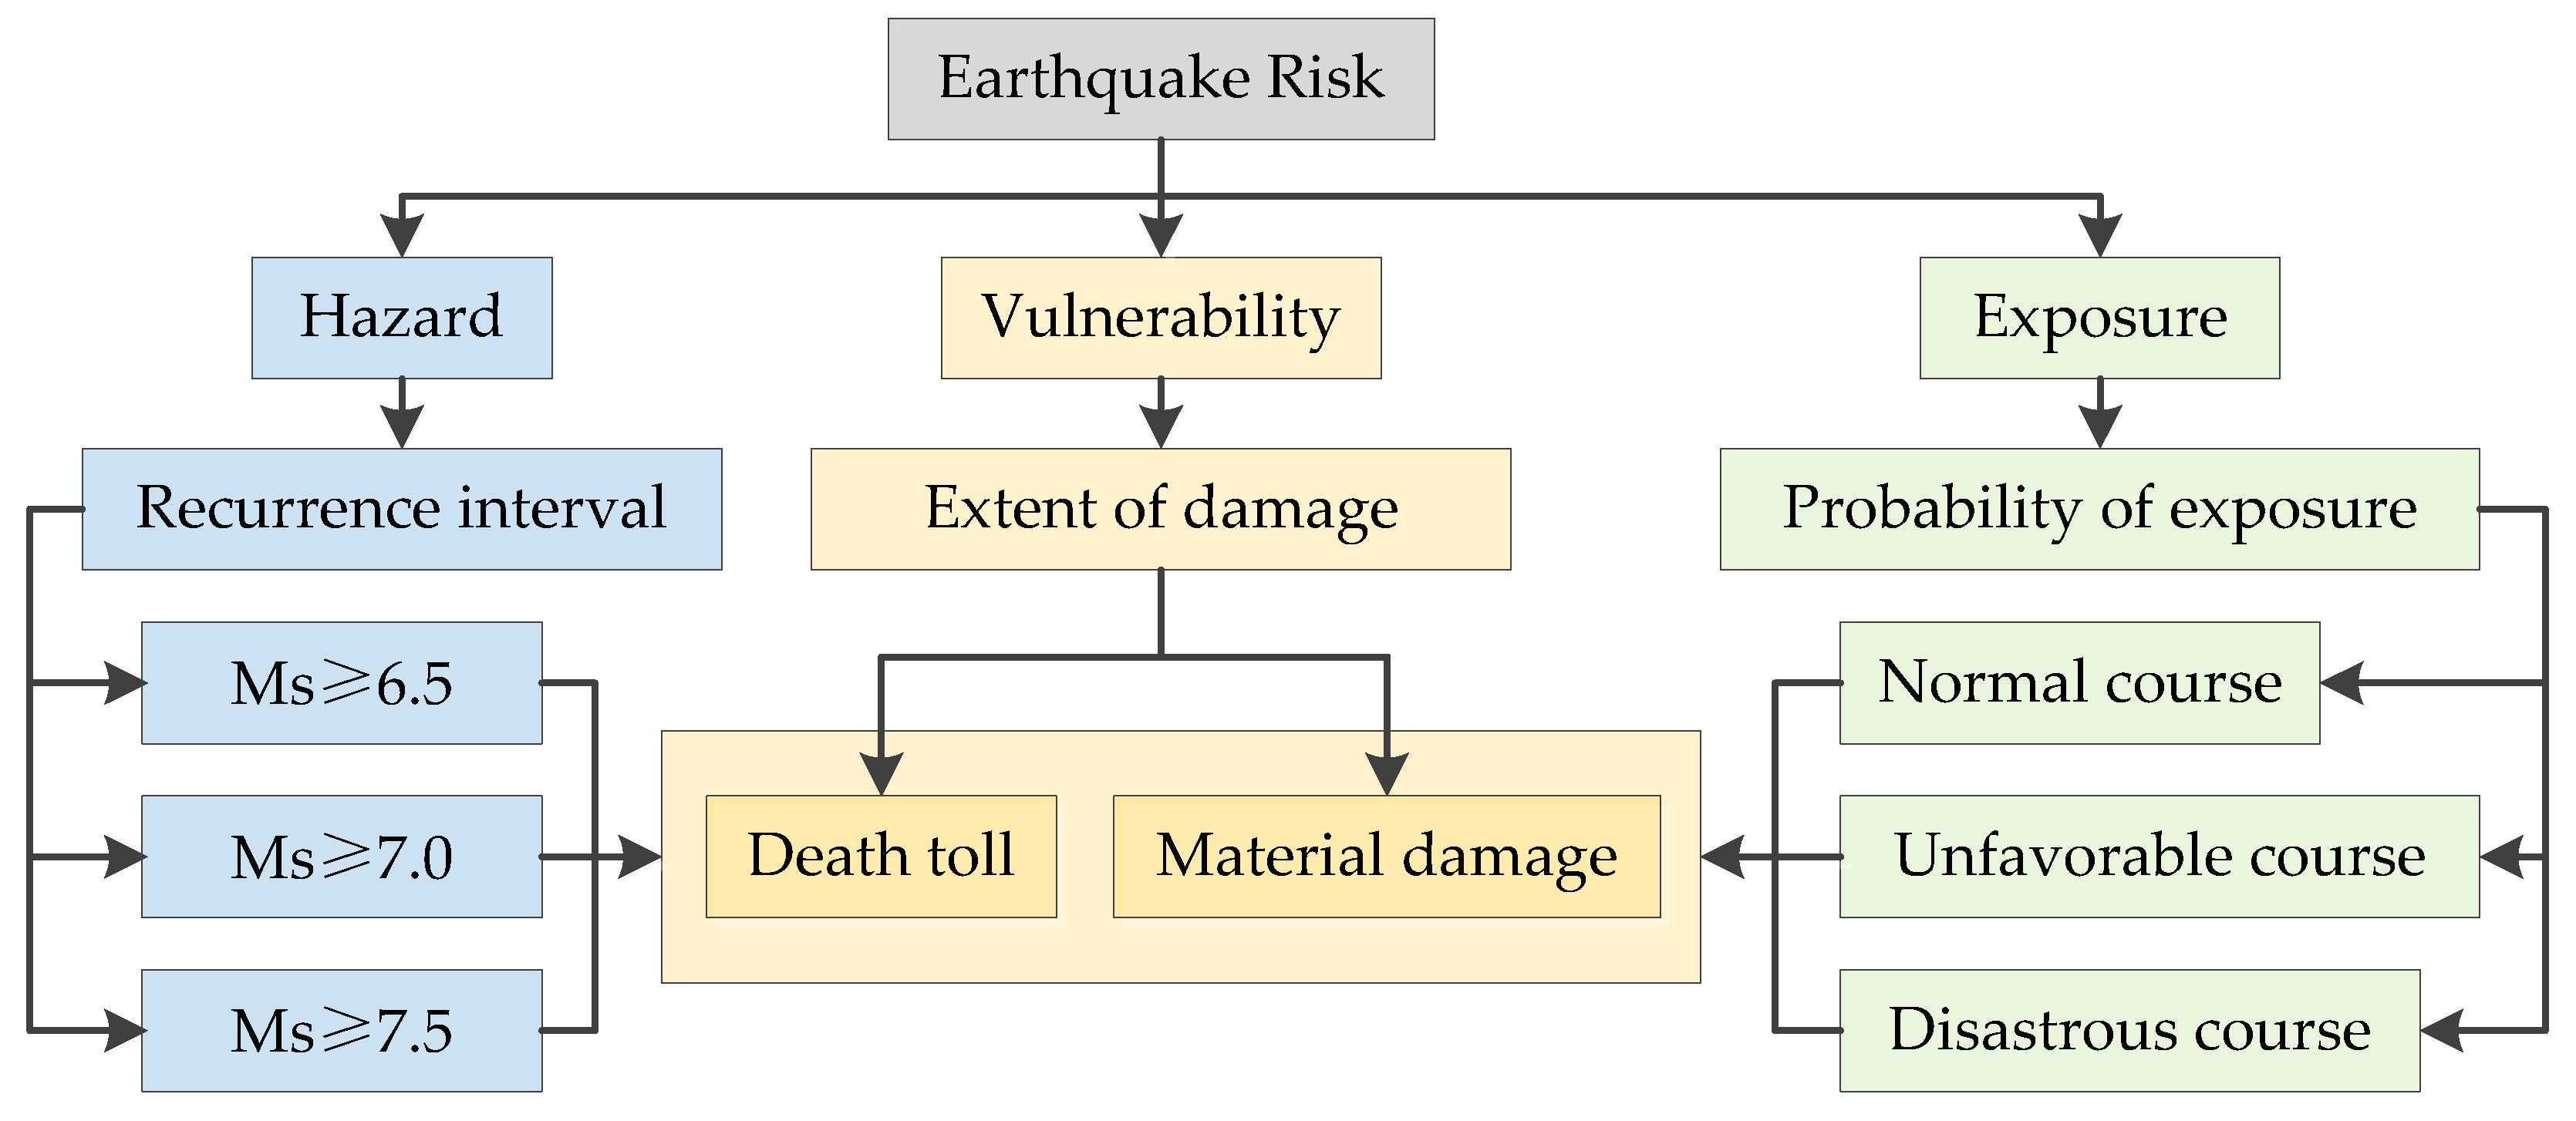 Sustainability | Free Full-Text | Using RISKPLAN for Earthquake